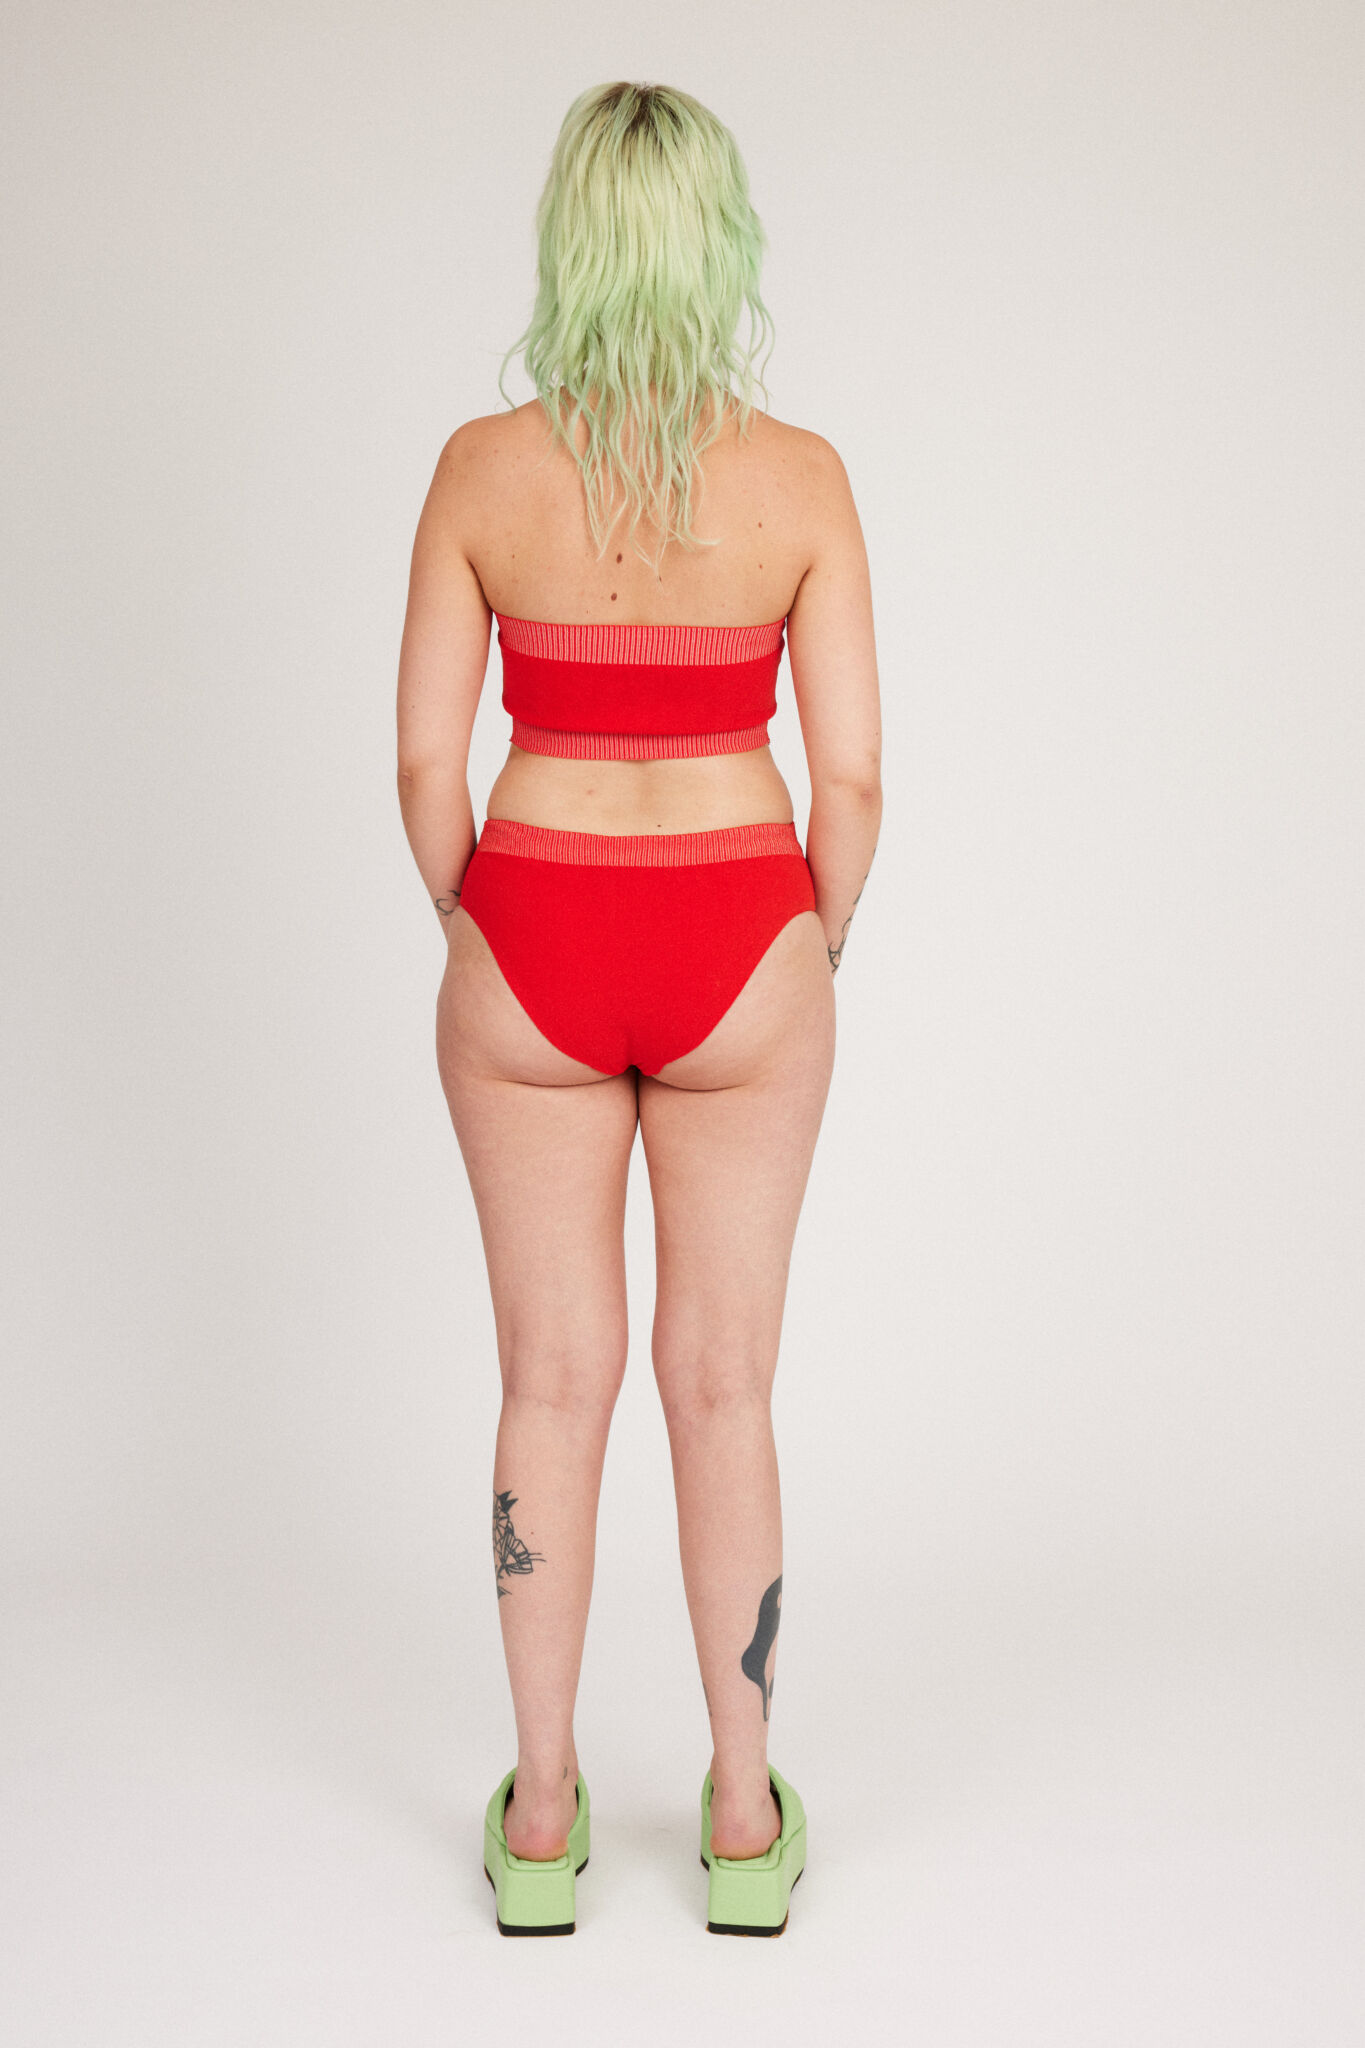 Spring Bloomer Top in red and pink is a knitted sporty tube top with logo and ribbed edges. Knitted in a body fitted, yet flexible material that adapts to the body. Can be mixed and matched with Spring Bloomer Panty and be used as swimwear.